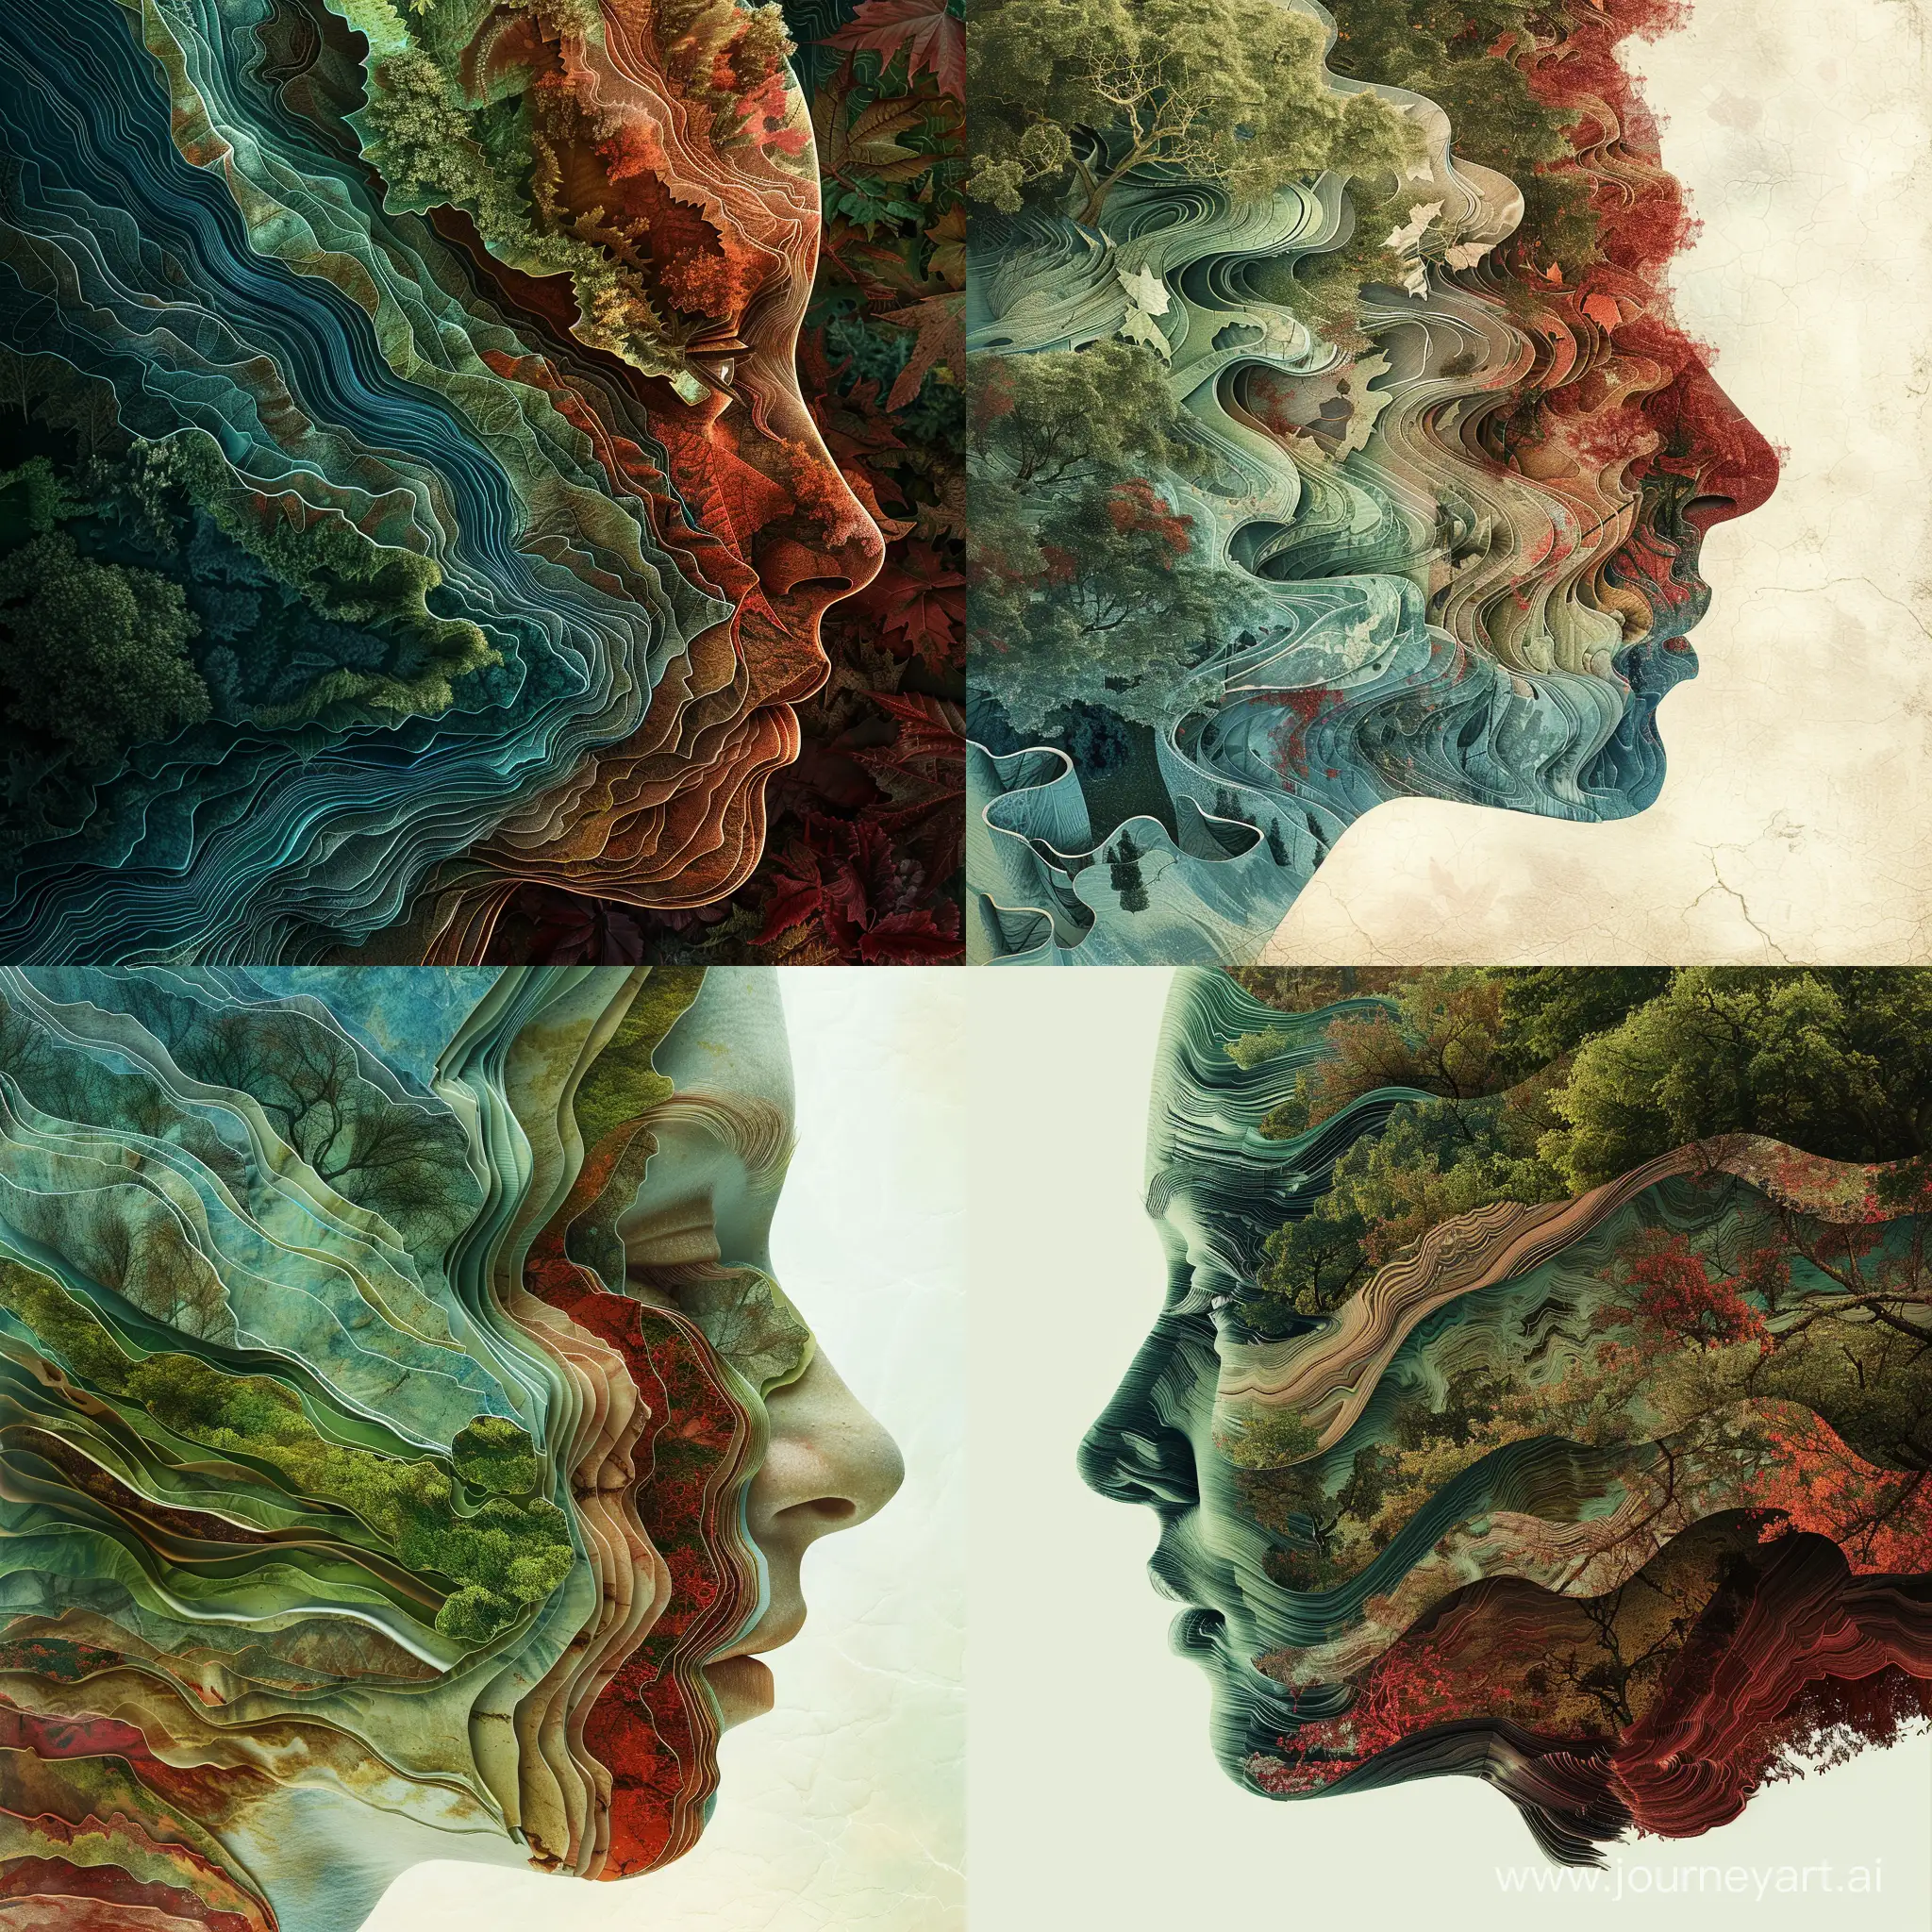 Create an image of a profile of a human face that transitions from one side to the other with layered, wavelike textures. The left side should feature cool tones, predominantly green and blue, evoking lush foliage. The right side should contrast with warm tones, predominantly red and brown, reminiscent of rich earth and autumn leaves. The textures should give the impression of a topographical map, with flowing layers that create a sense of depth, blending organically into each other. The overall atmosphere should be serene and harmonious, symbolizing a connection with nature.